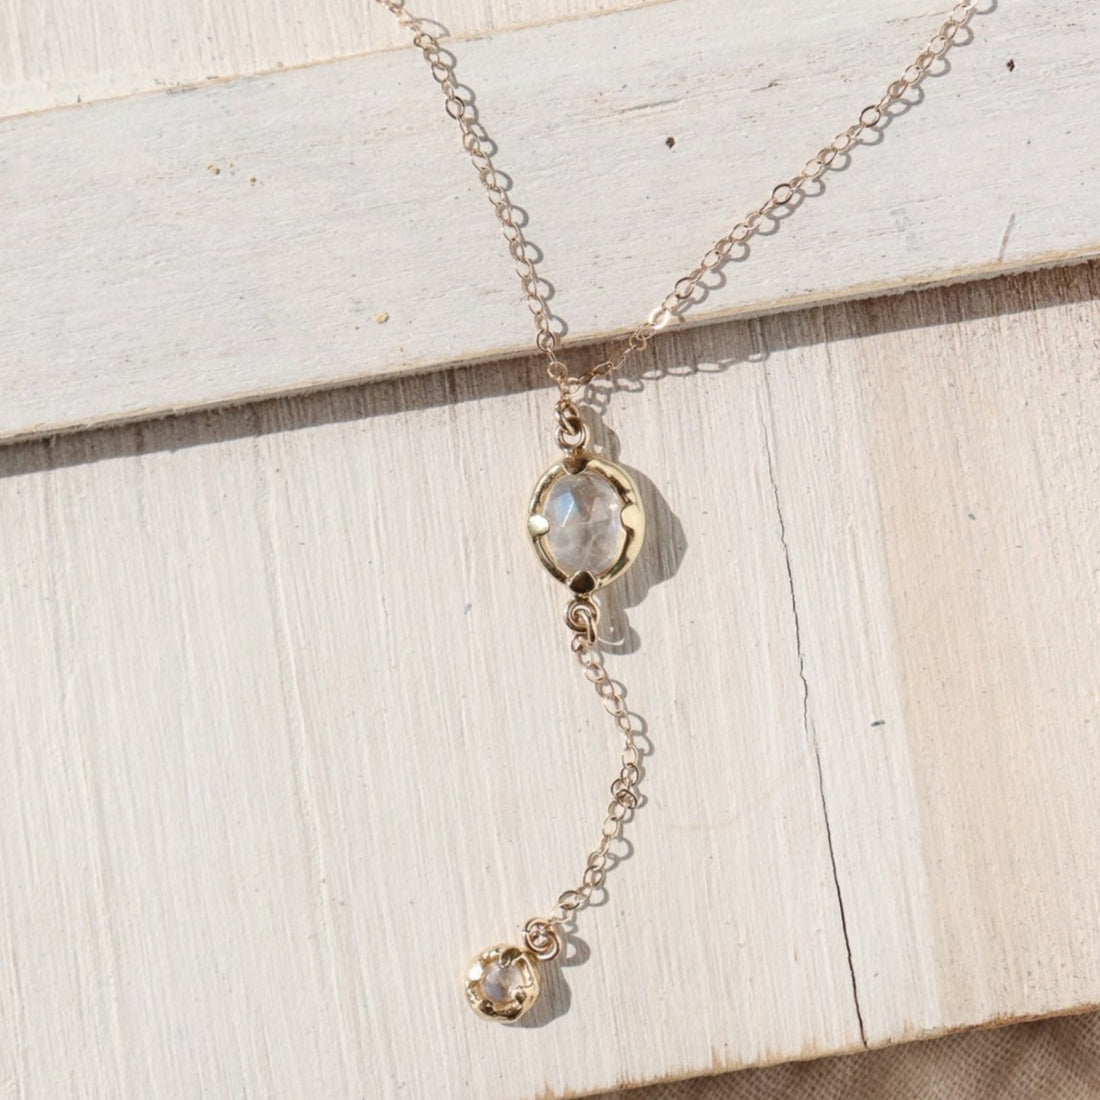 A rainbow moonstone lariat necklace lays on a white washed board